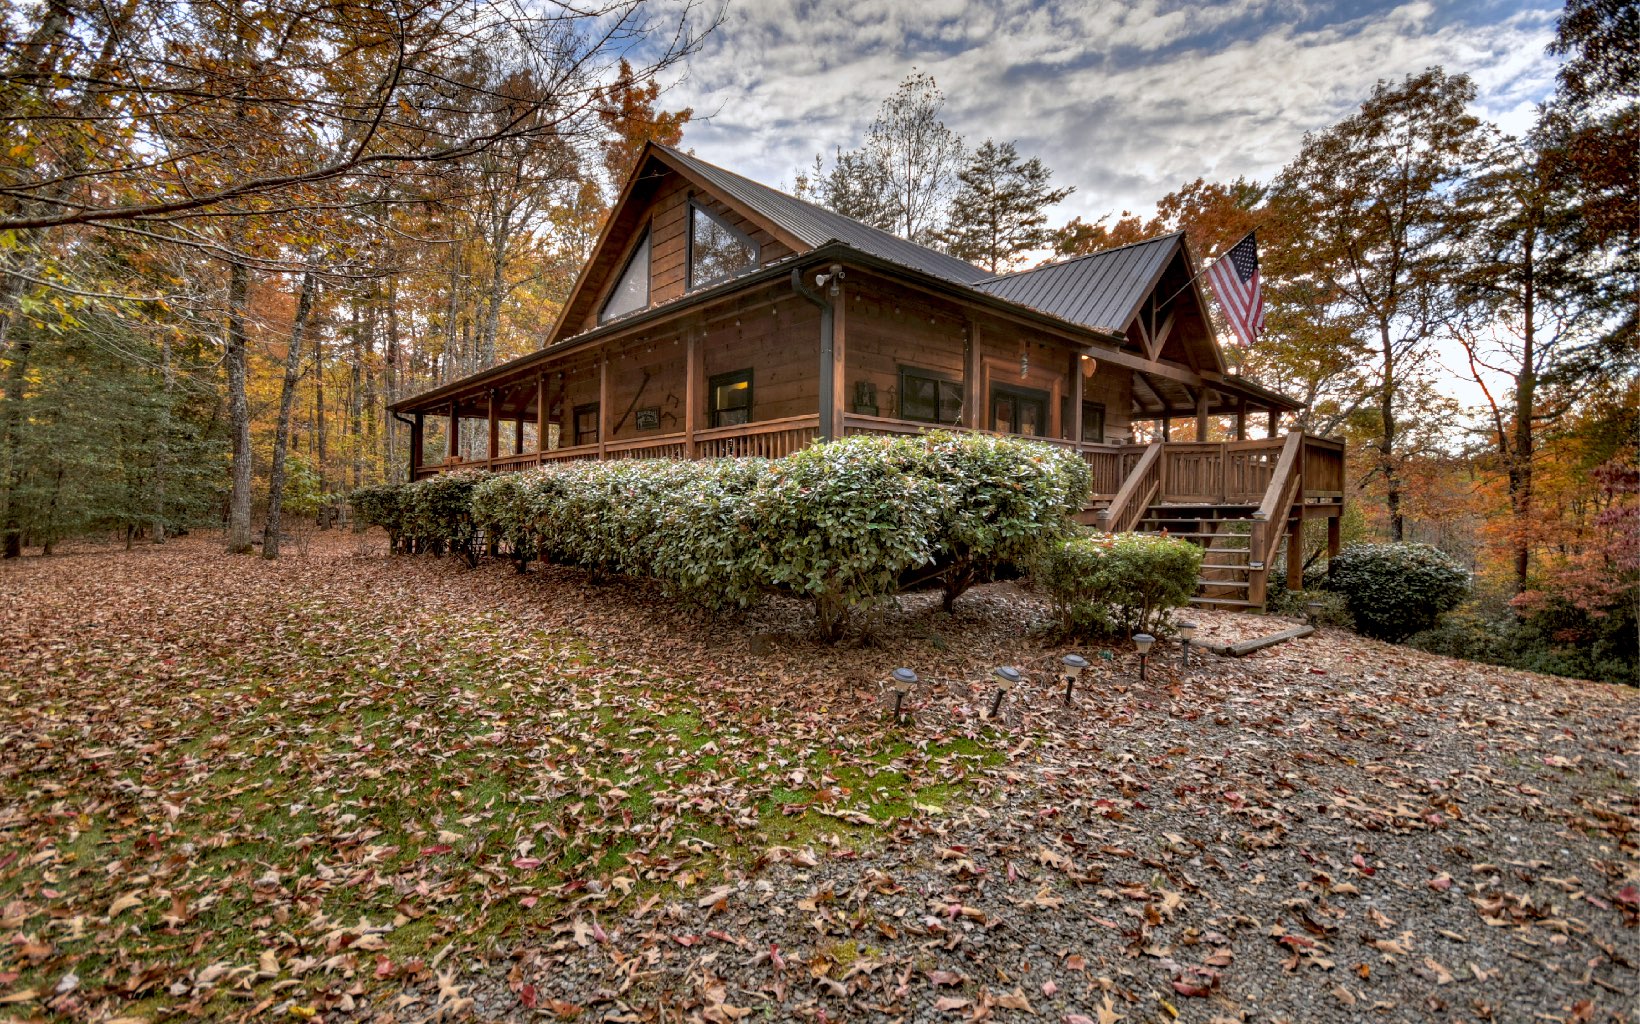 CAN BE A SHORT TERM RENTAL! Unique Mountain Cottage nestled in a very desirable River Estates community near Downtown Blue Ridge, this 3br/3.5ba cabin offers privacy & an abundance of wildlife views complete with Toccoa River Access. A rarity for the area. This cabin invites you in with its elegant wrap around porch, subtle woodwork details, warm finishes that define the friendly feel. Upon entry you will find the comfortable living space complimented by a floor to ceiling stone fireplace & wood beam cathedral ceilings. This well-designed property offers a functional floor plan & convenient main level living area, a spacious Primary en suite on main level, upscale wood interior design, & an oversize loft area that can sleep up to 6. The full finished basement level comes complete w laundry area & addtl entertainment space. Not to be outdone, the walk-out lower level enjoys an appealing covered patio w possible fire pit area, access to the large, manicured backyard & storage shed for tools. Perfectly placed to enjoy all that Blue Ridge has to offer w low maintenance living & a world of recreation right out the door. Blue Ridge offers the finest in culture, shopping & dining. It is a mecca for year-round recreational activities & offers endless opportunities golfing, fishing, hiking, biking, rafting, kayaking & more. Enjoy its endless beauty throughout the seasons!